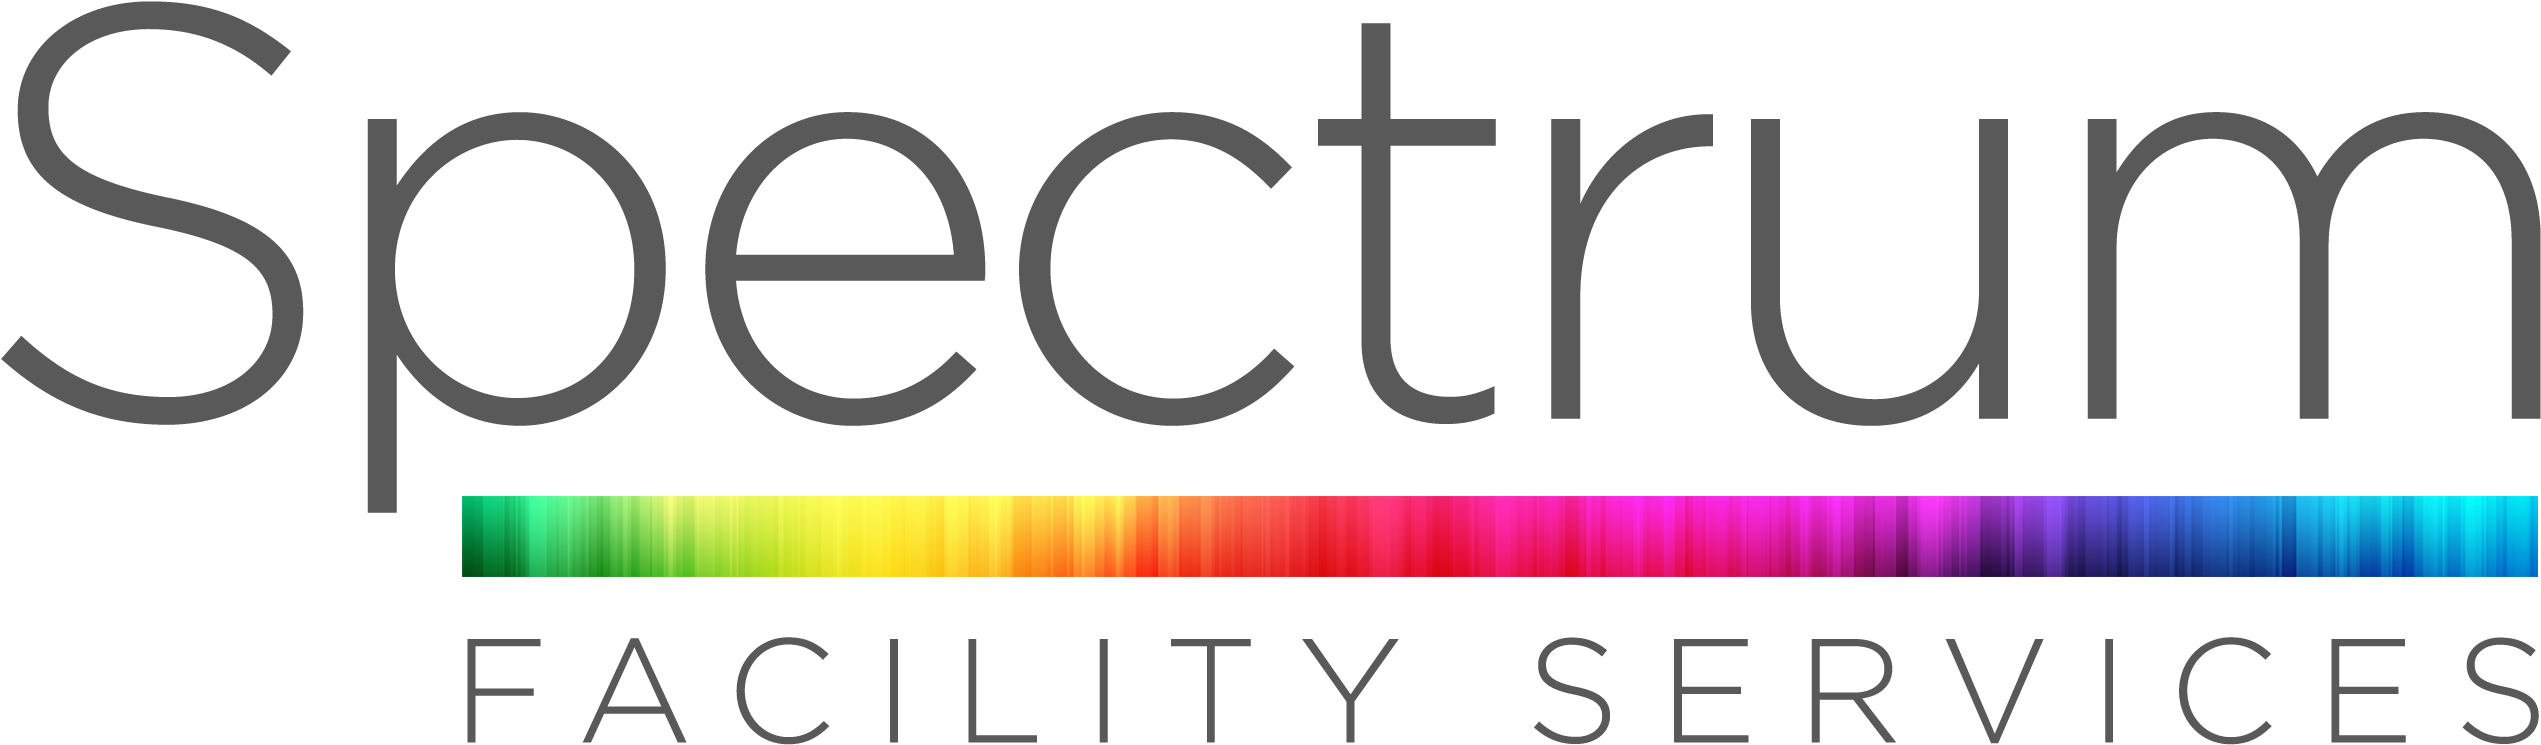 Spectrum Facility Services Logo PNG image